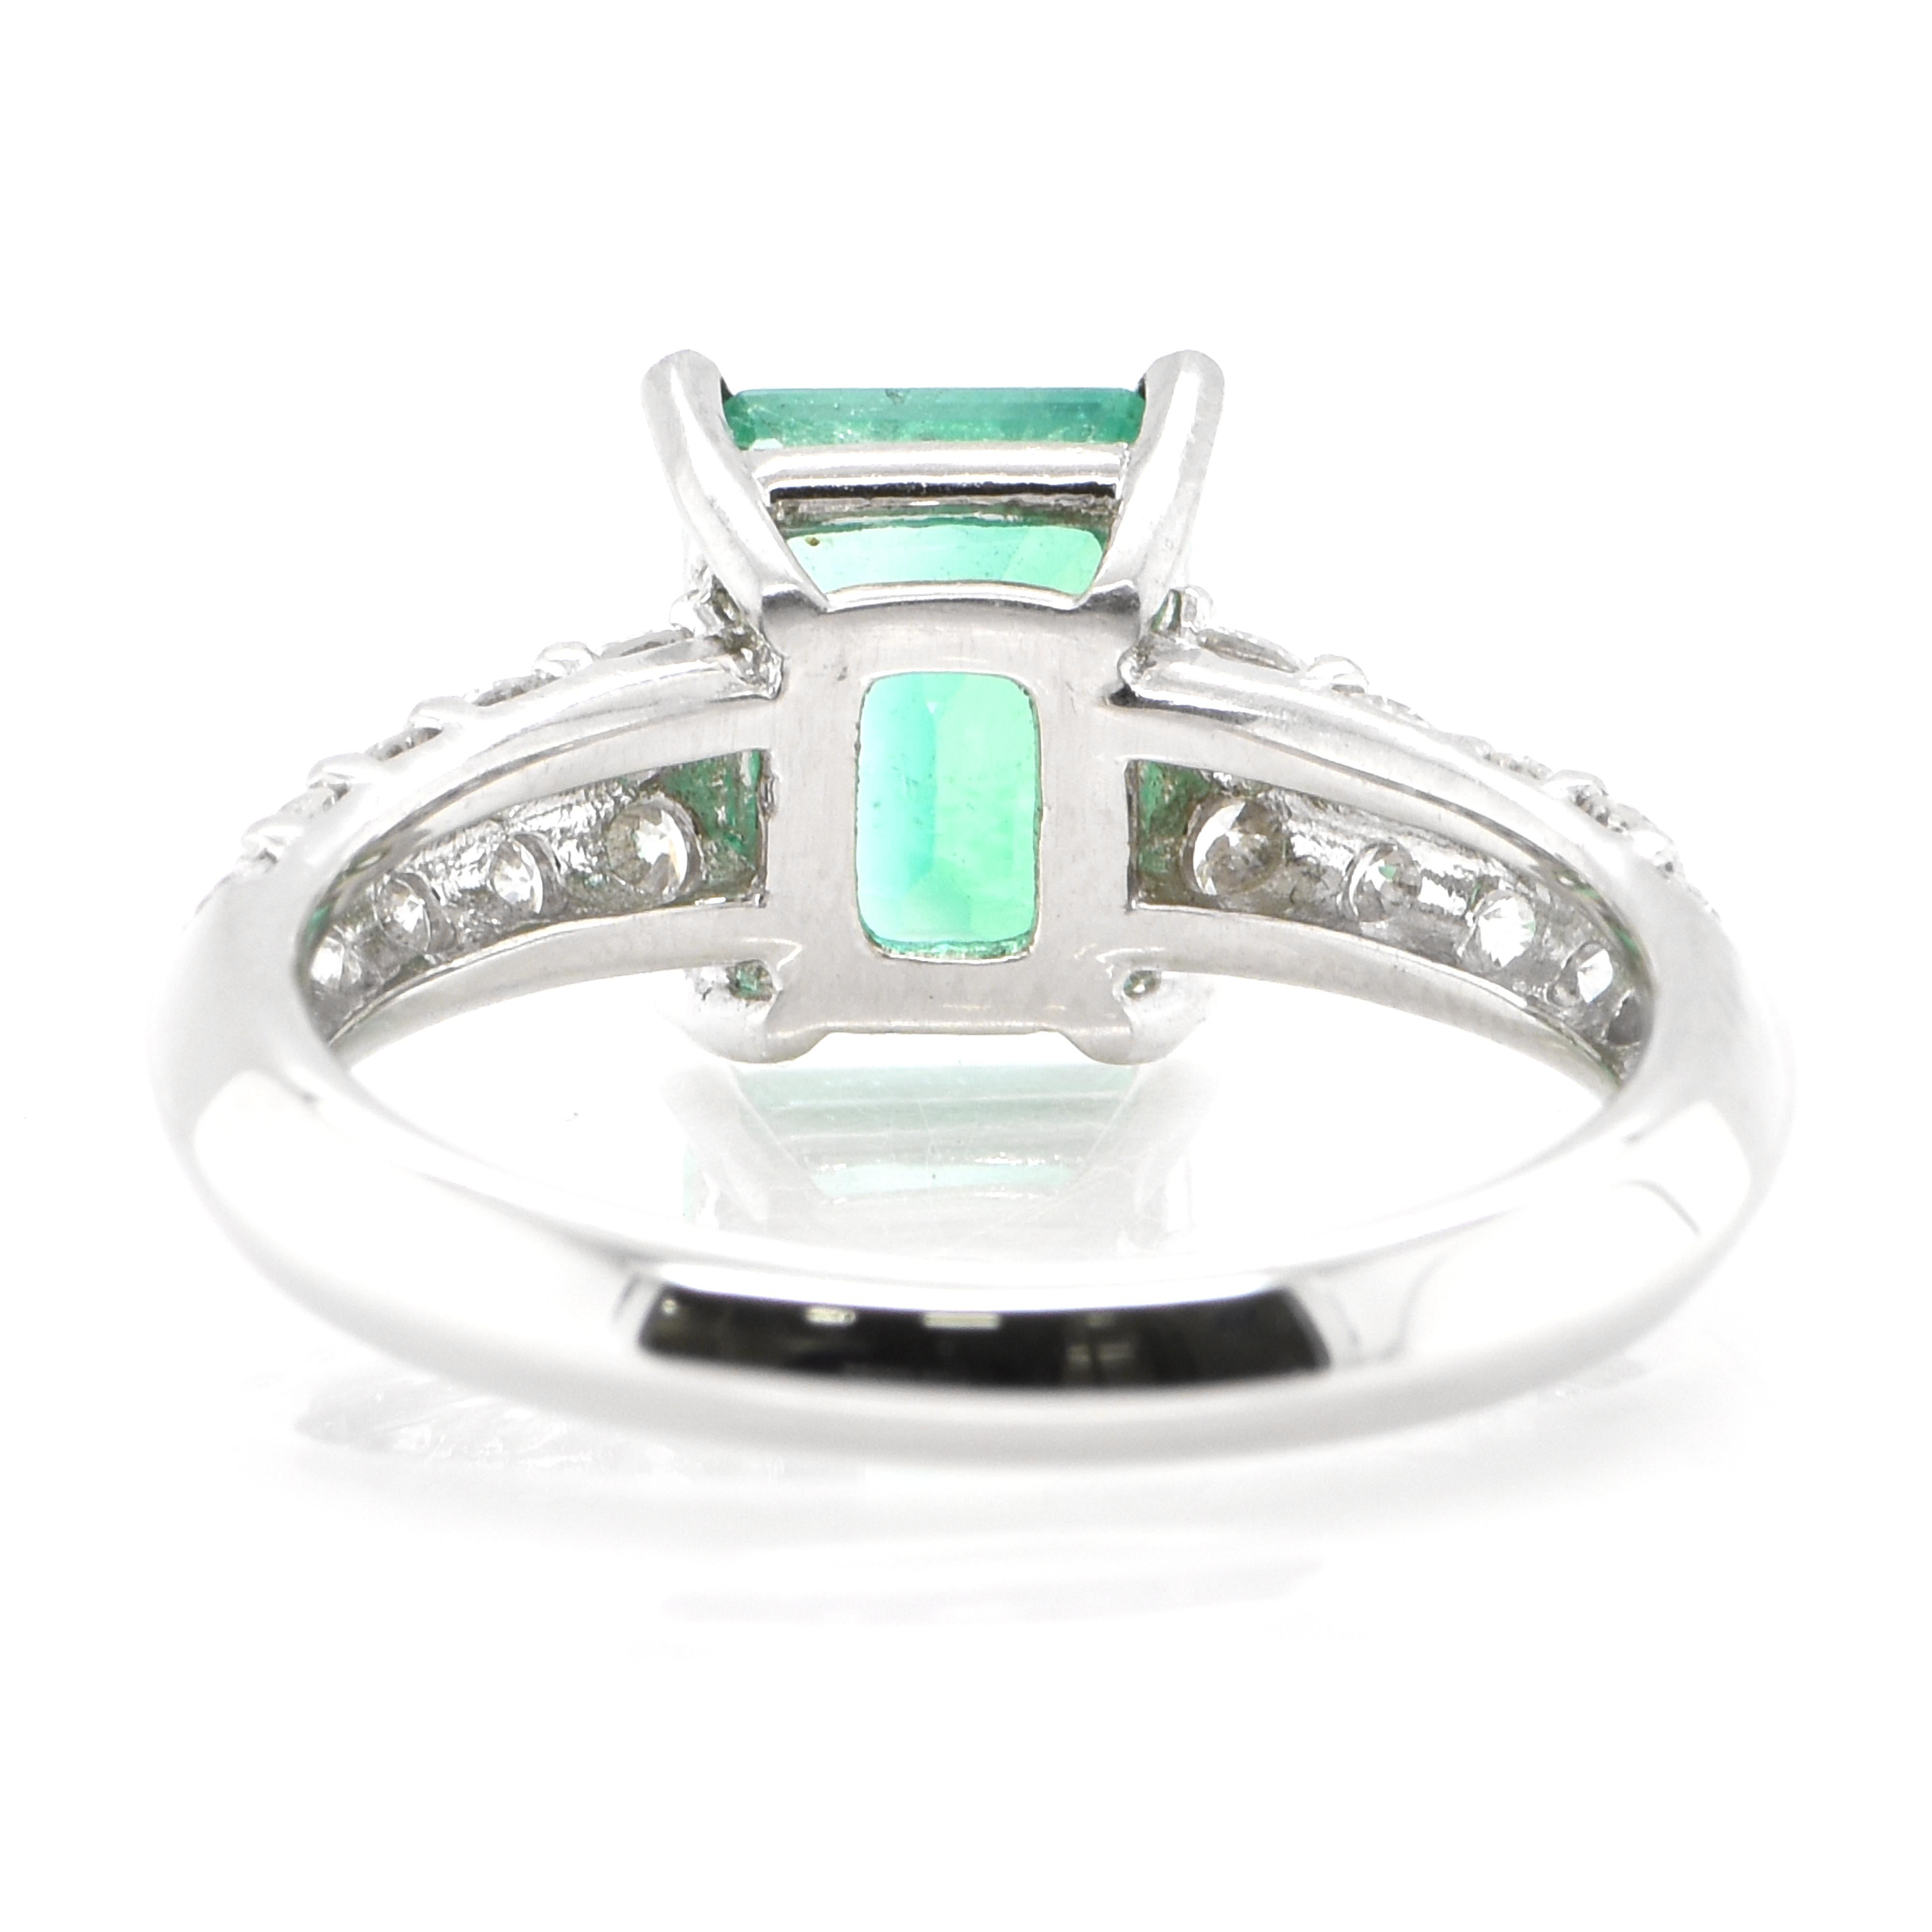 Women's 1.65 Carat Natural Colombian Emerald and Diamond Ring Set in Platinum